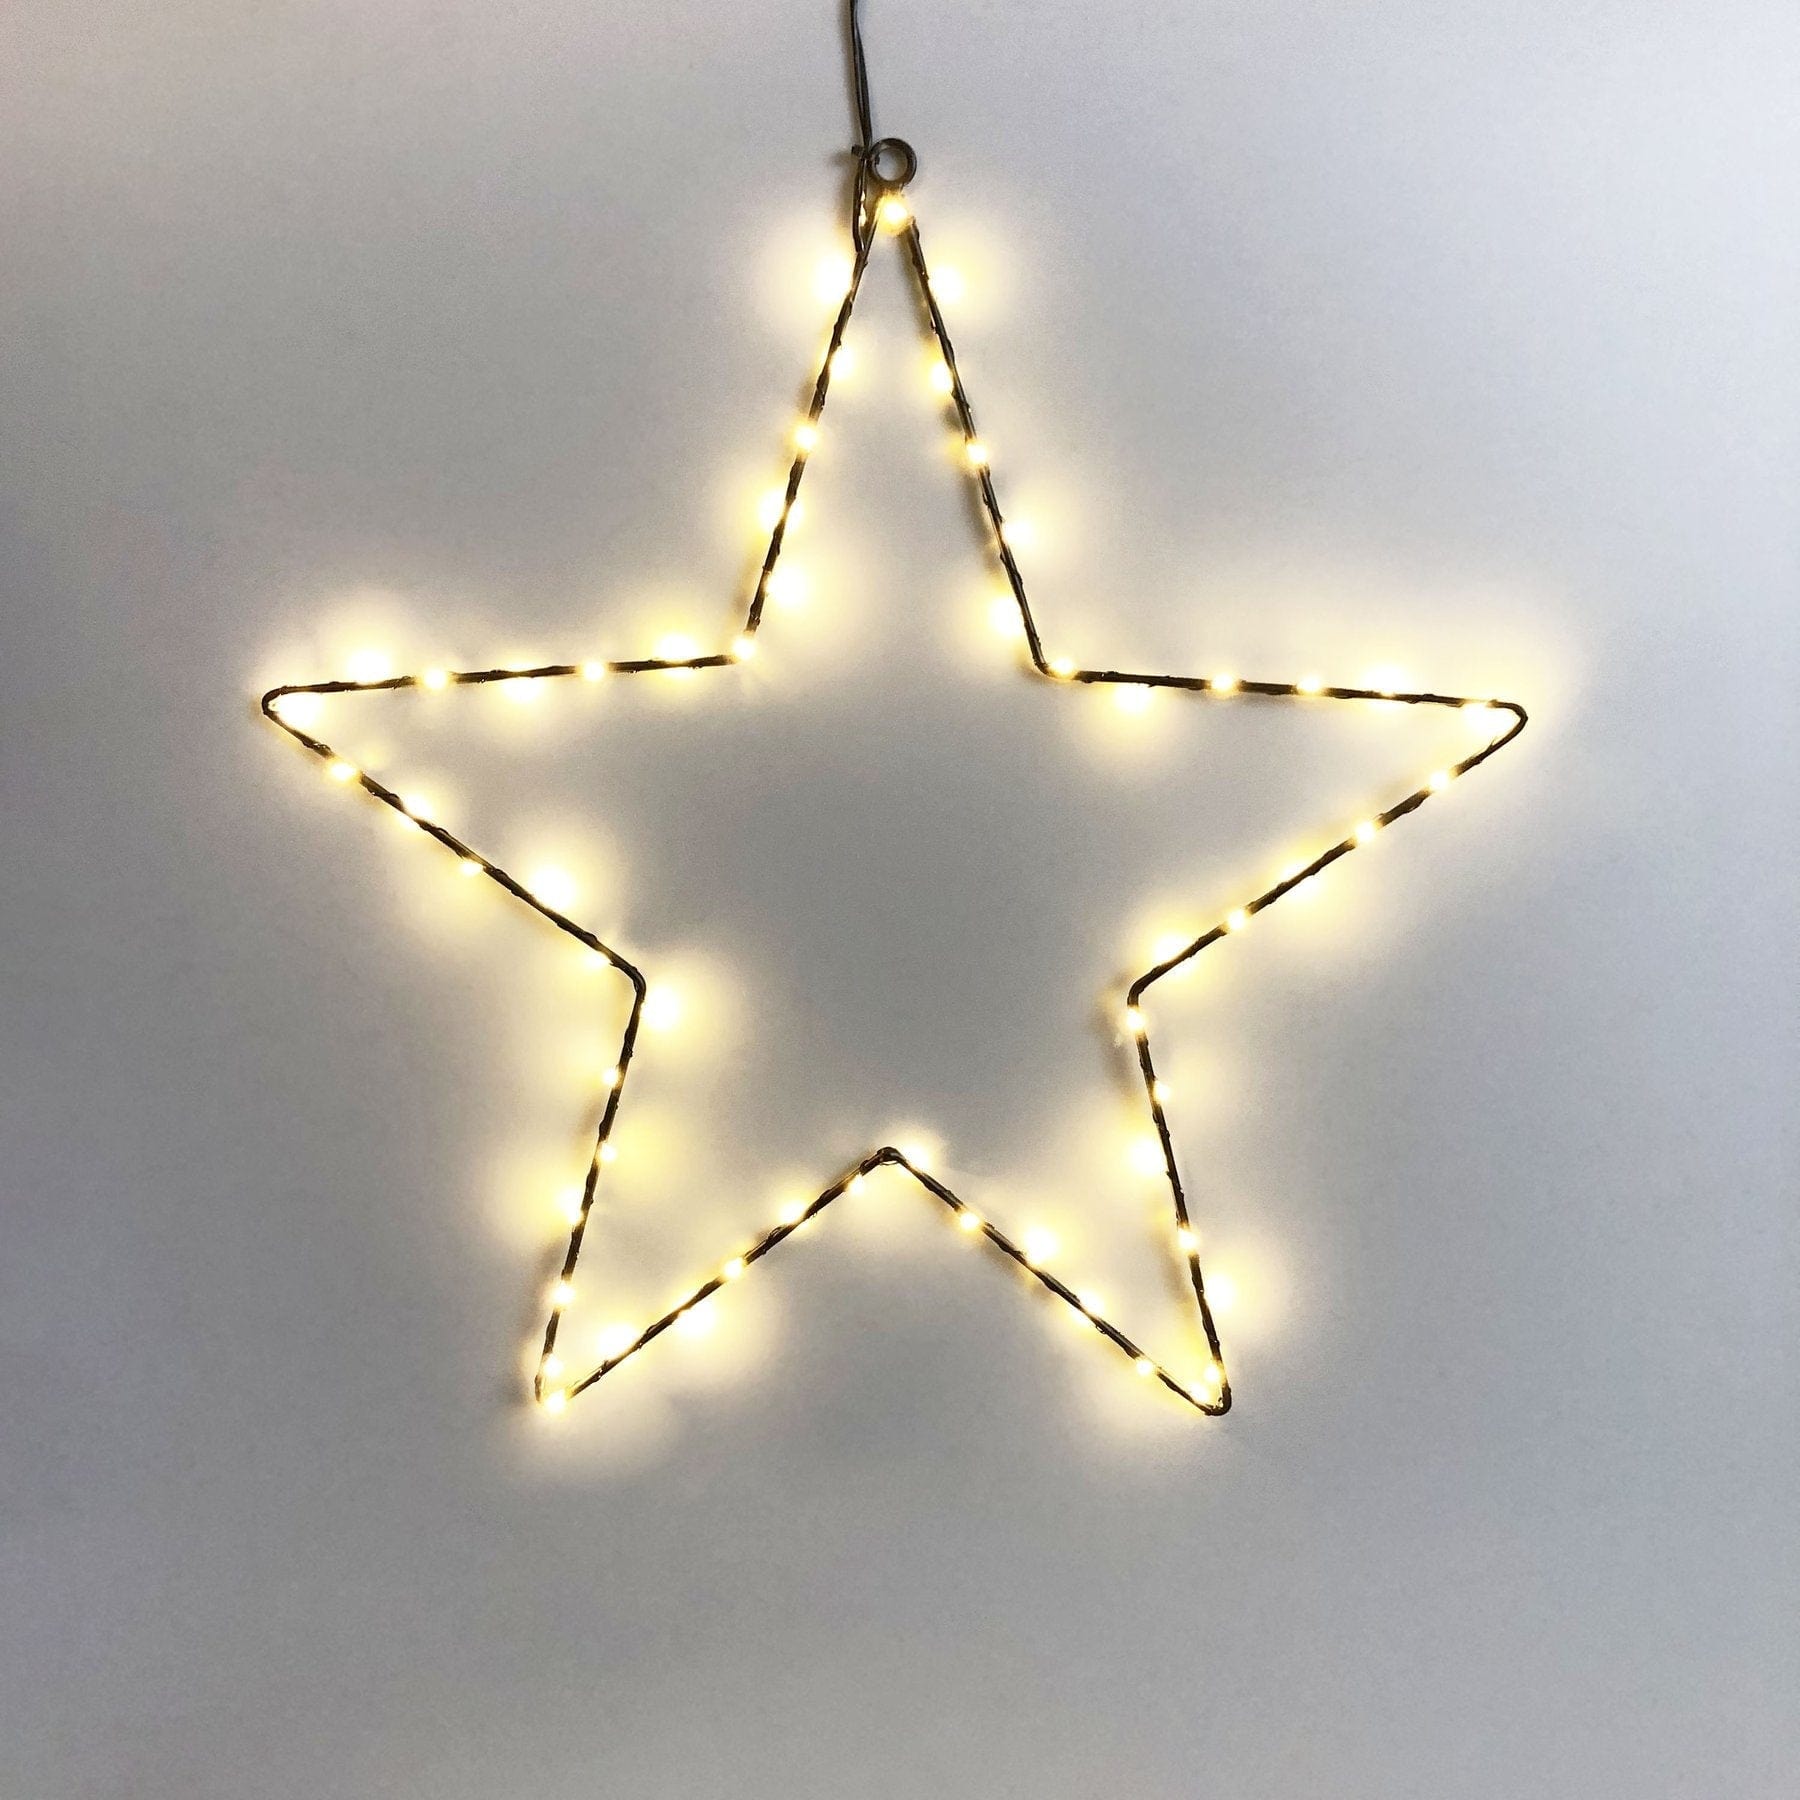 Lexi Lighting Christmas Ceiling&Wall Decoration Hanging Star with Dual Color LED - 2 Size Options